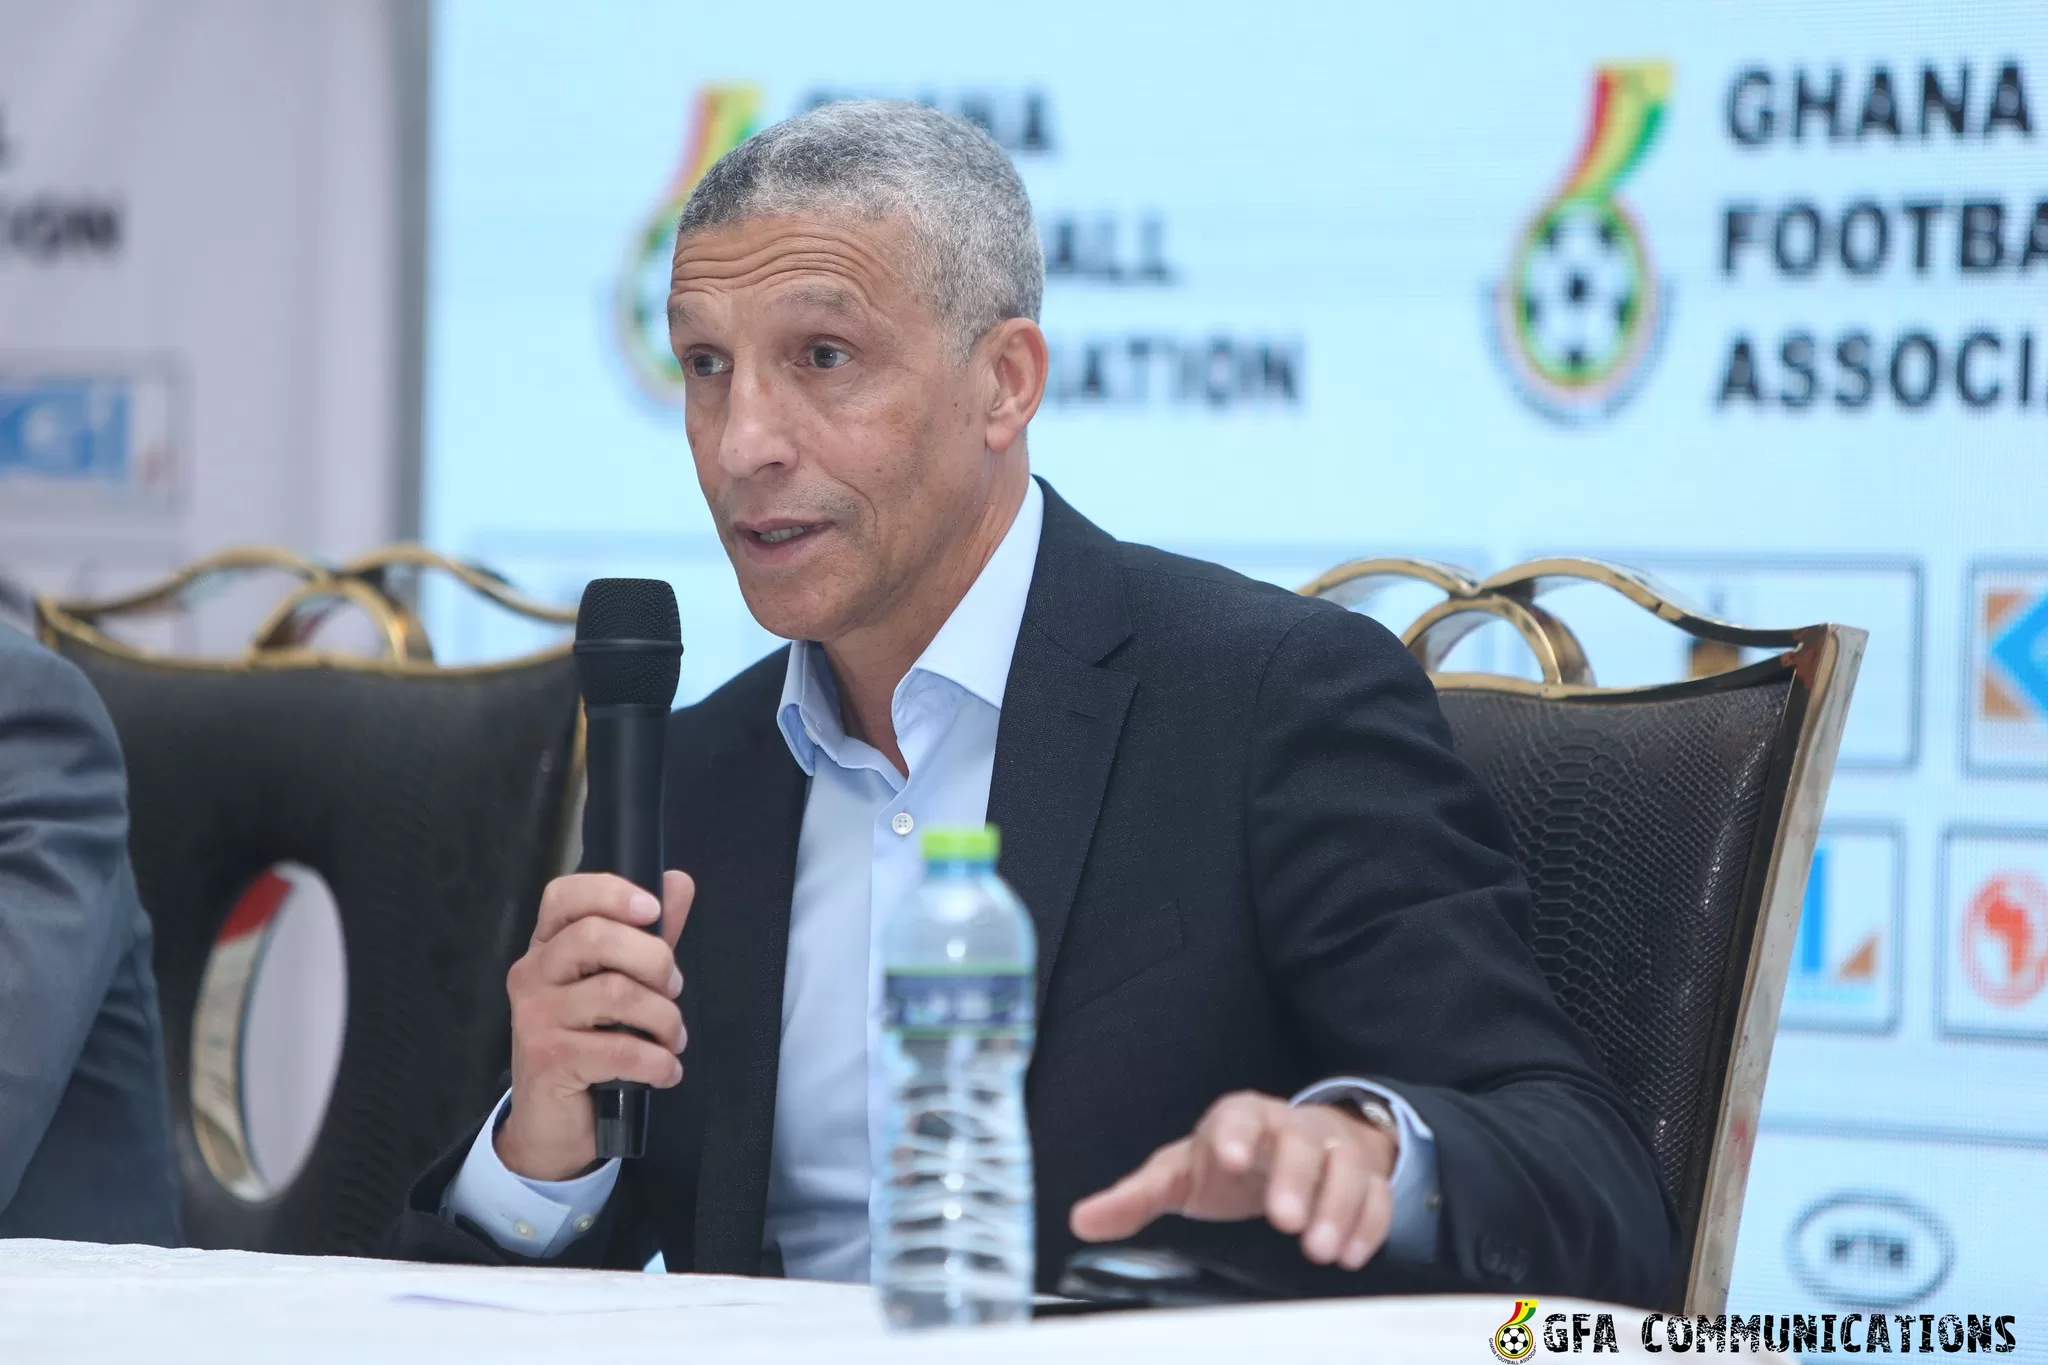 Ghana coach Chris Hughton claims he developed positive relationships with his players while serving as technical advisor